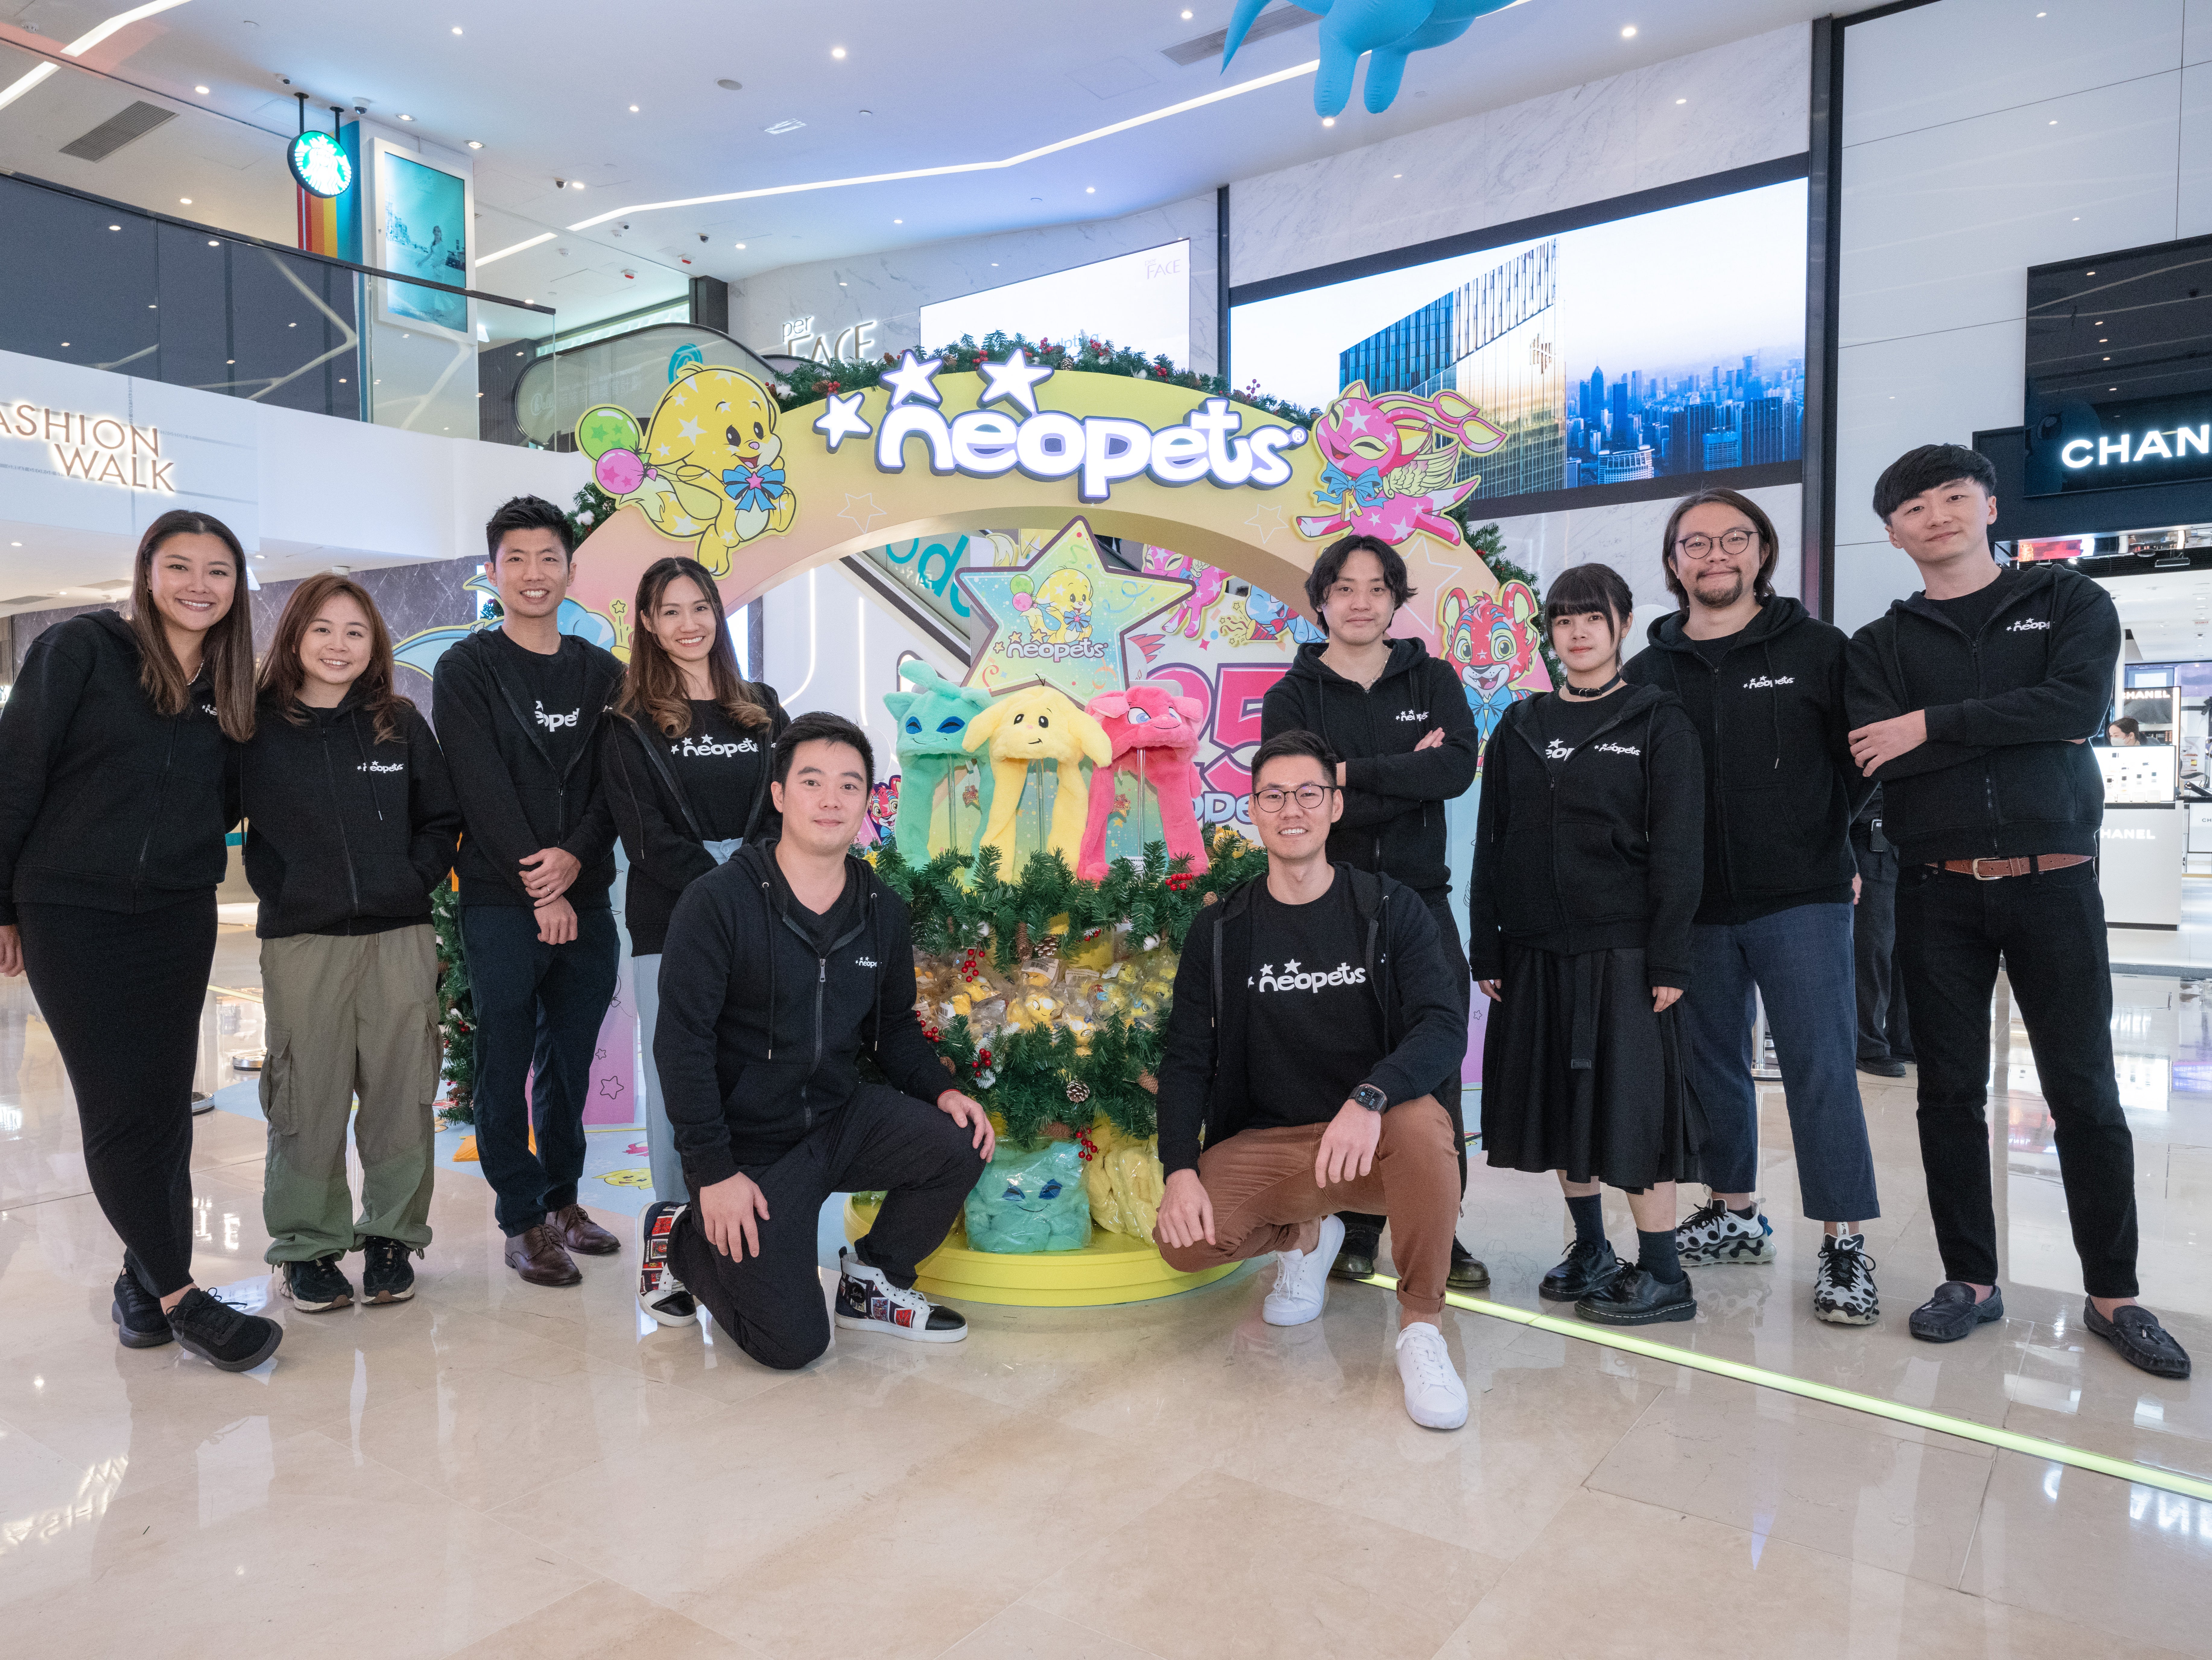 Members of the Neopets development team together in Hong Kong